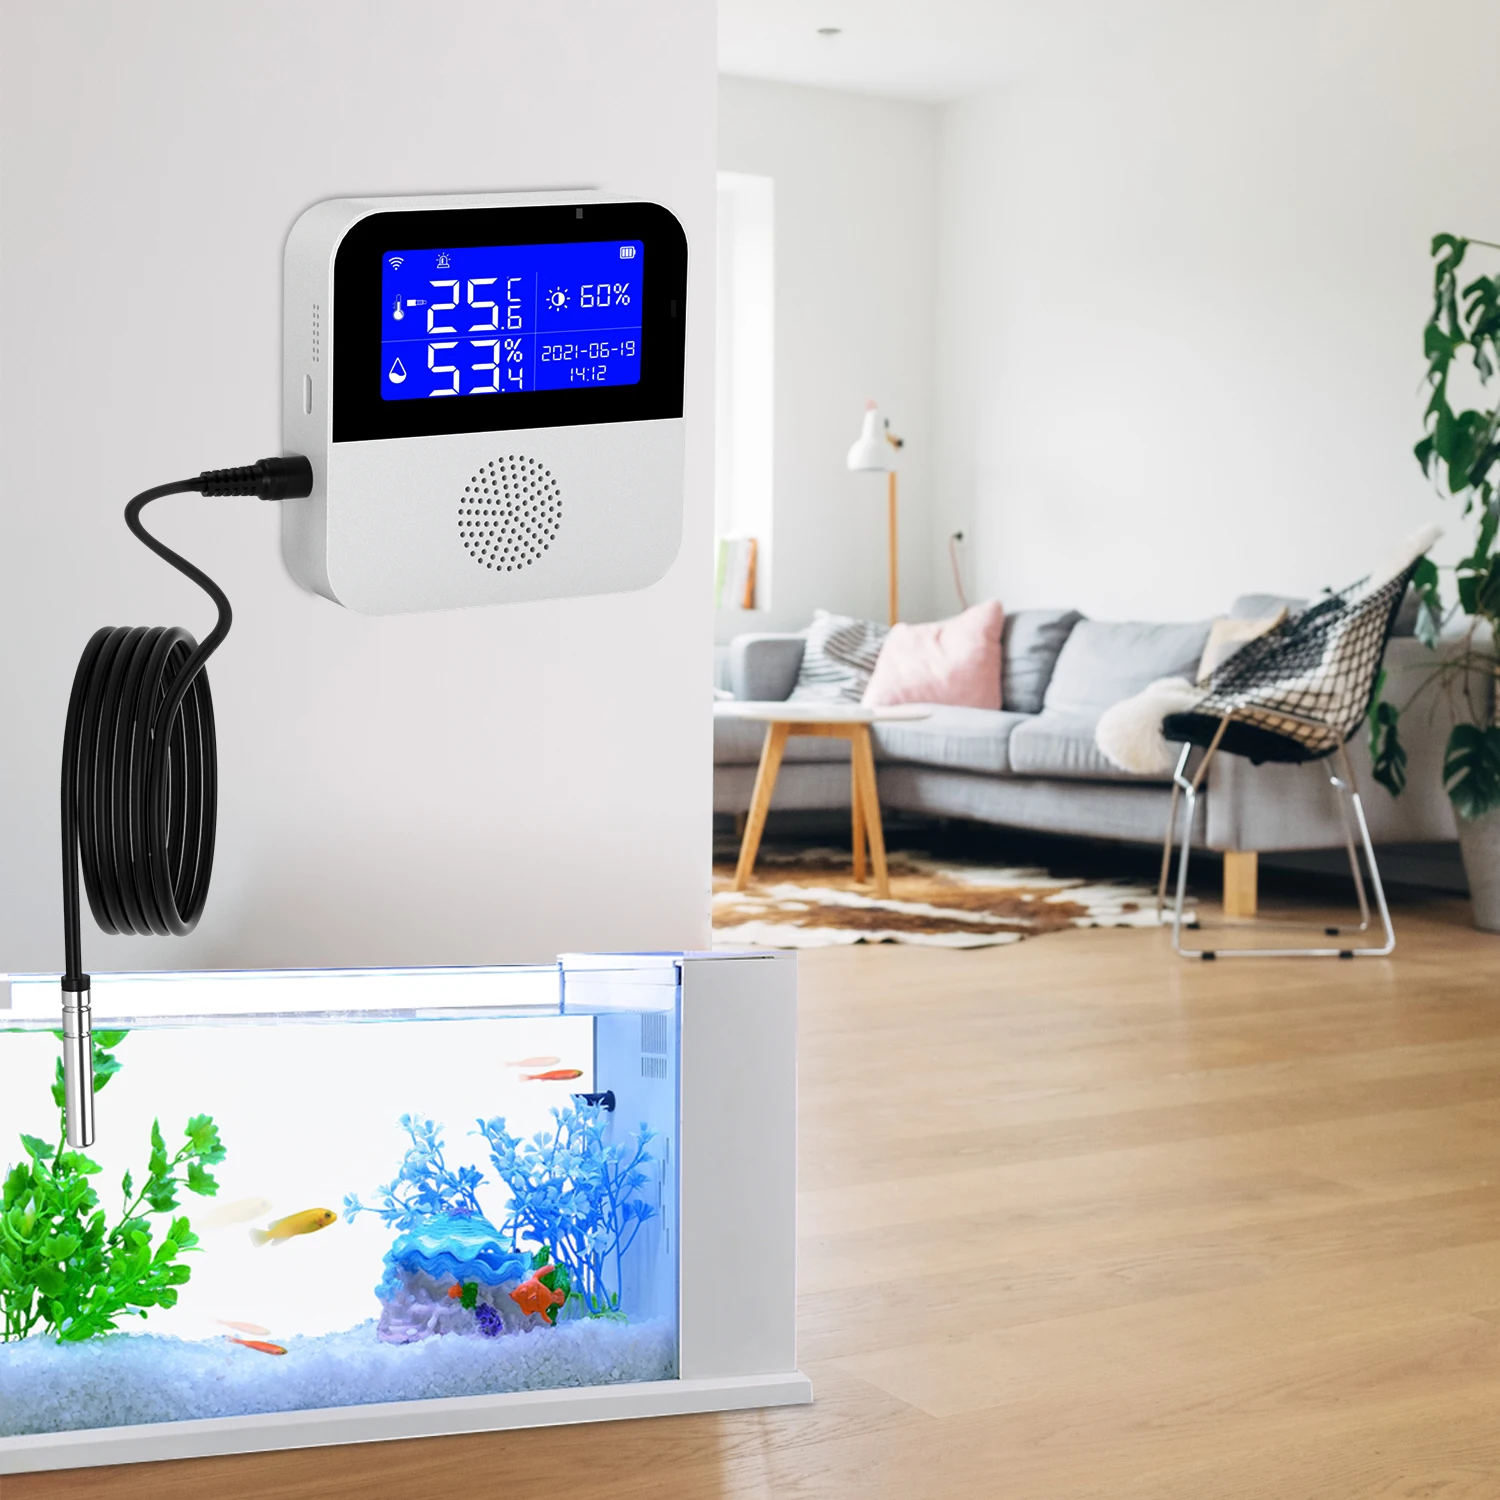 https://ae01.alicdn.com/kf/S28ad3bfe4fe74aceaaf5575cf05c68c2I/WiFi-smart-home-assistant-Tuya-smart-temperature-and-humidity-sensor-with-temperature-and-humidity-main-line.jpg